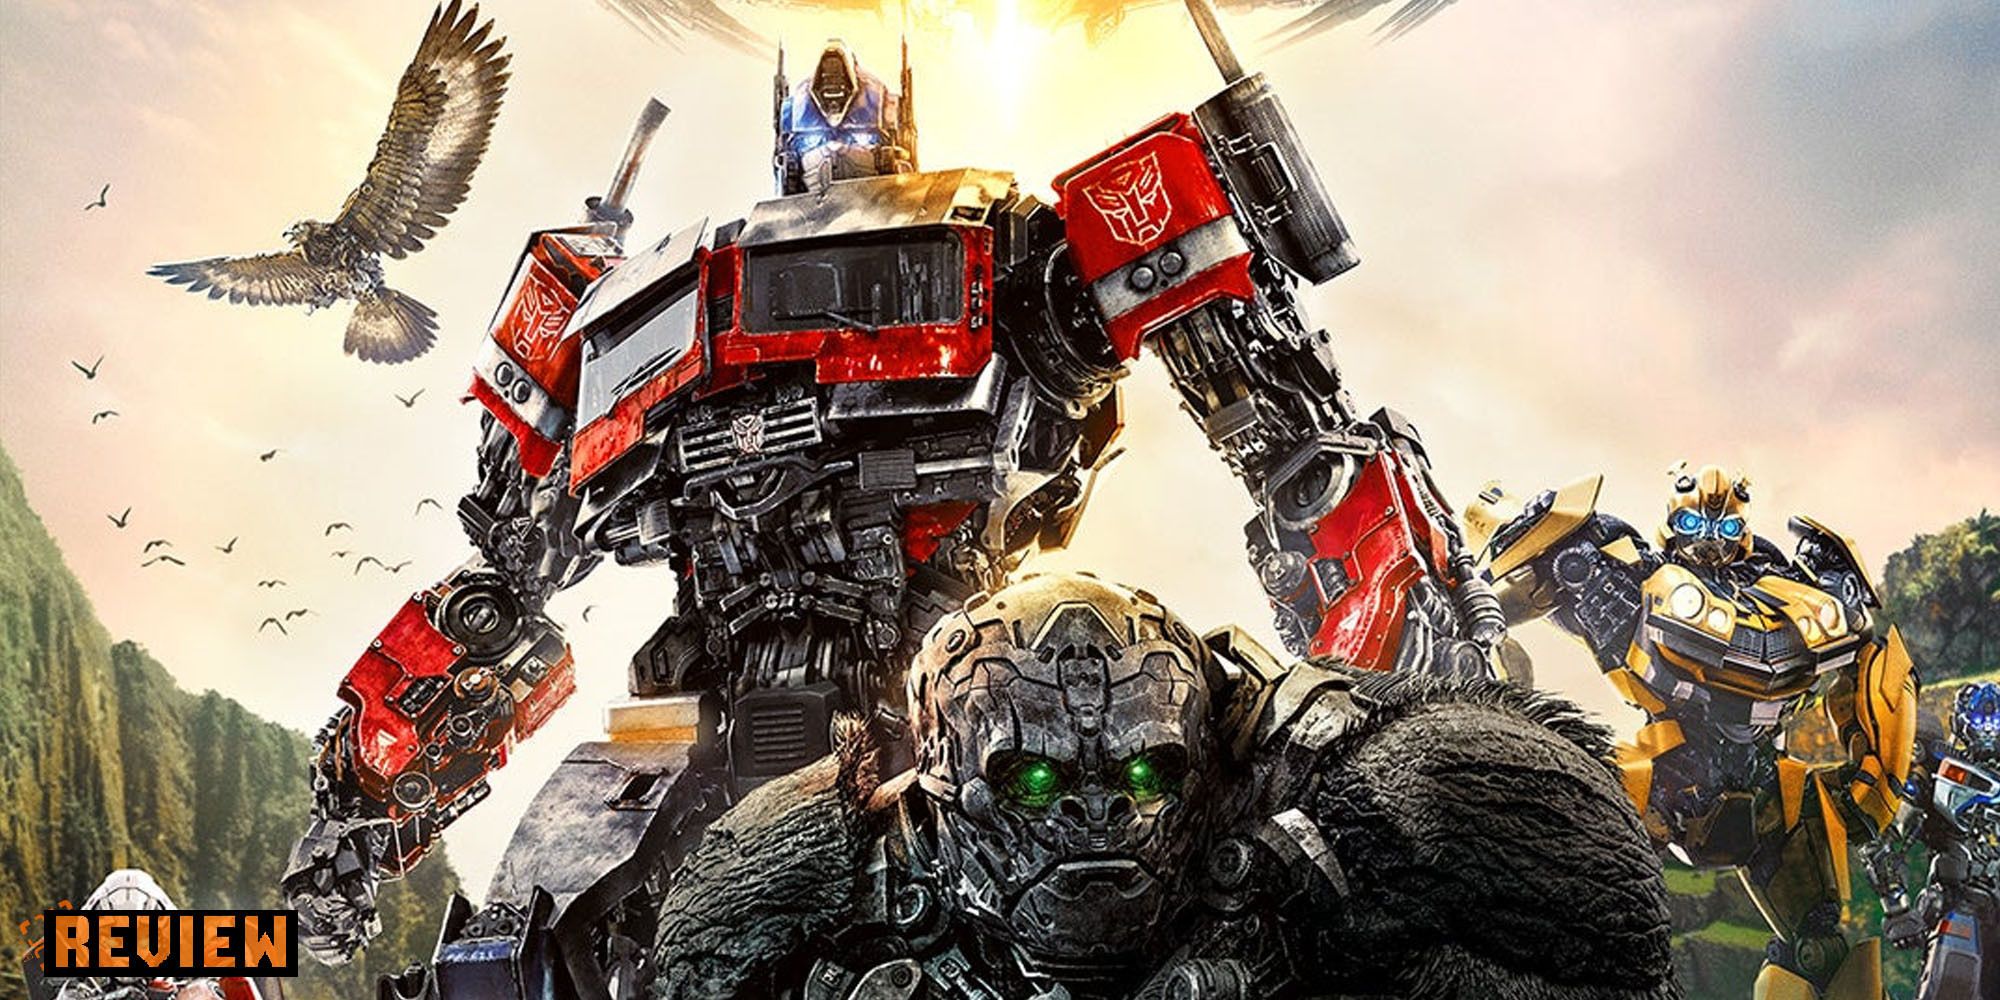 Transformers Rise of the Beasts review